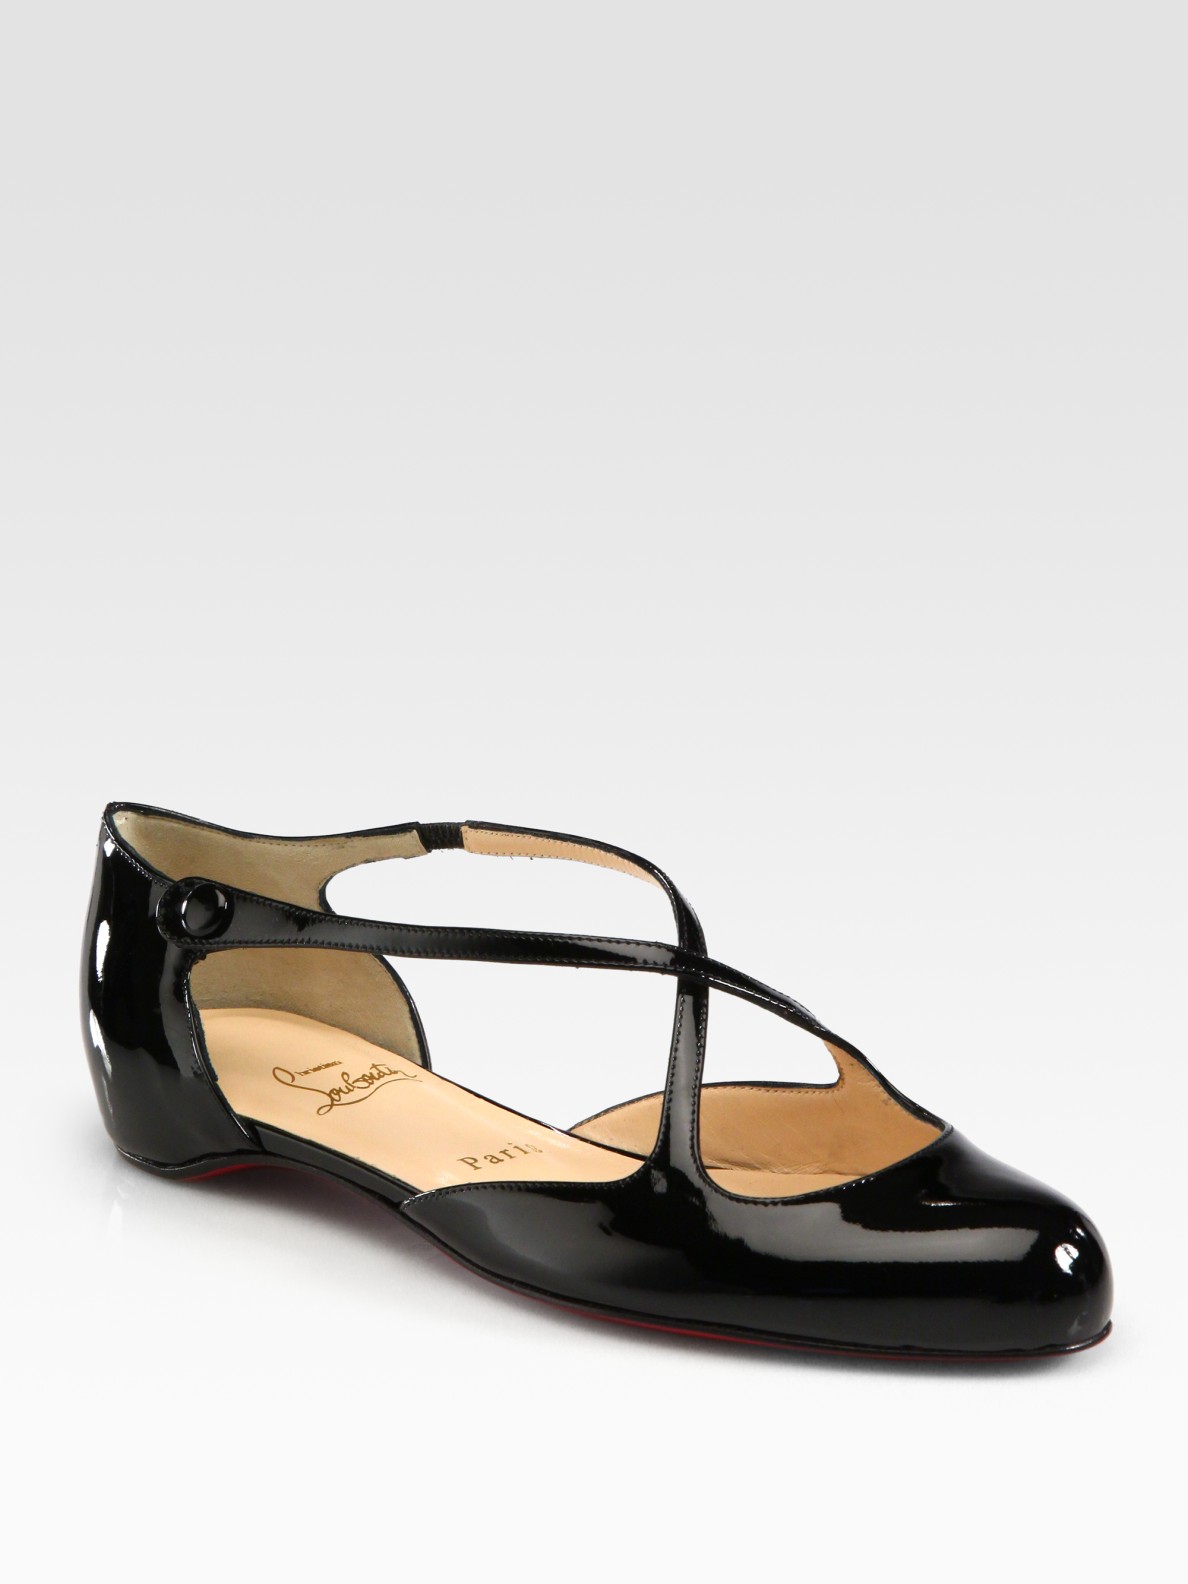 Christian Louboutin Pneumatica Patent Leather Jane Flats in Black | Lyst